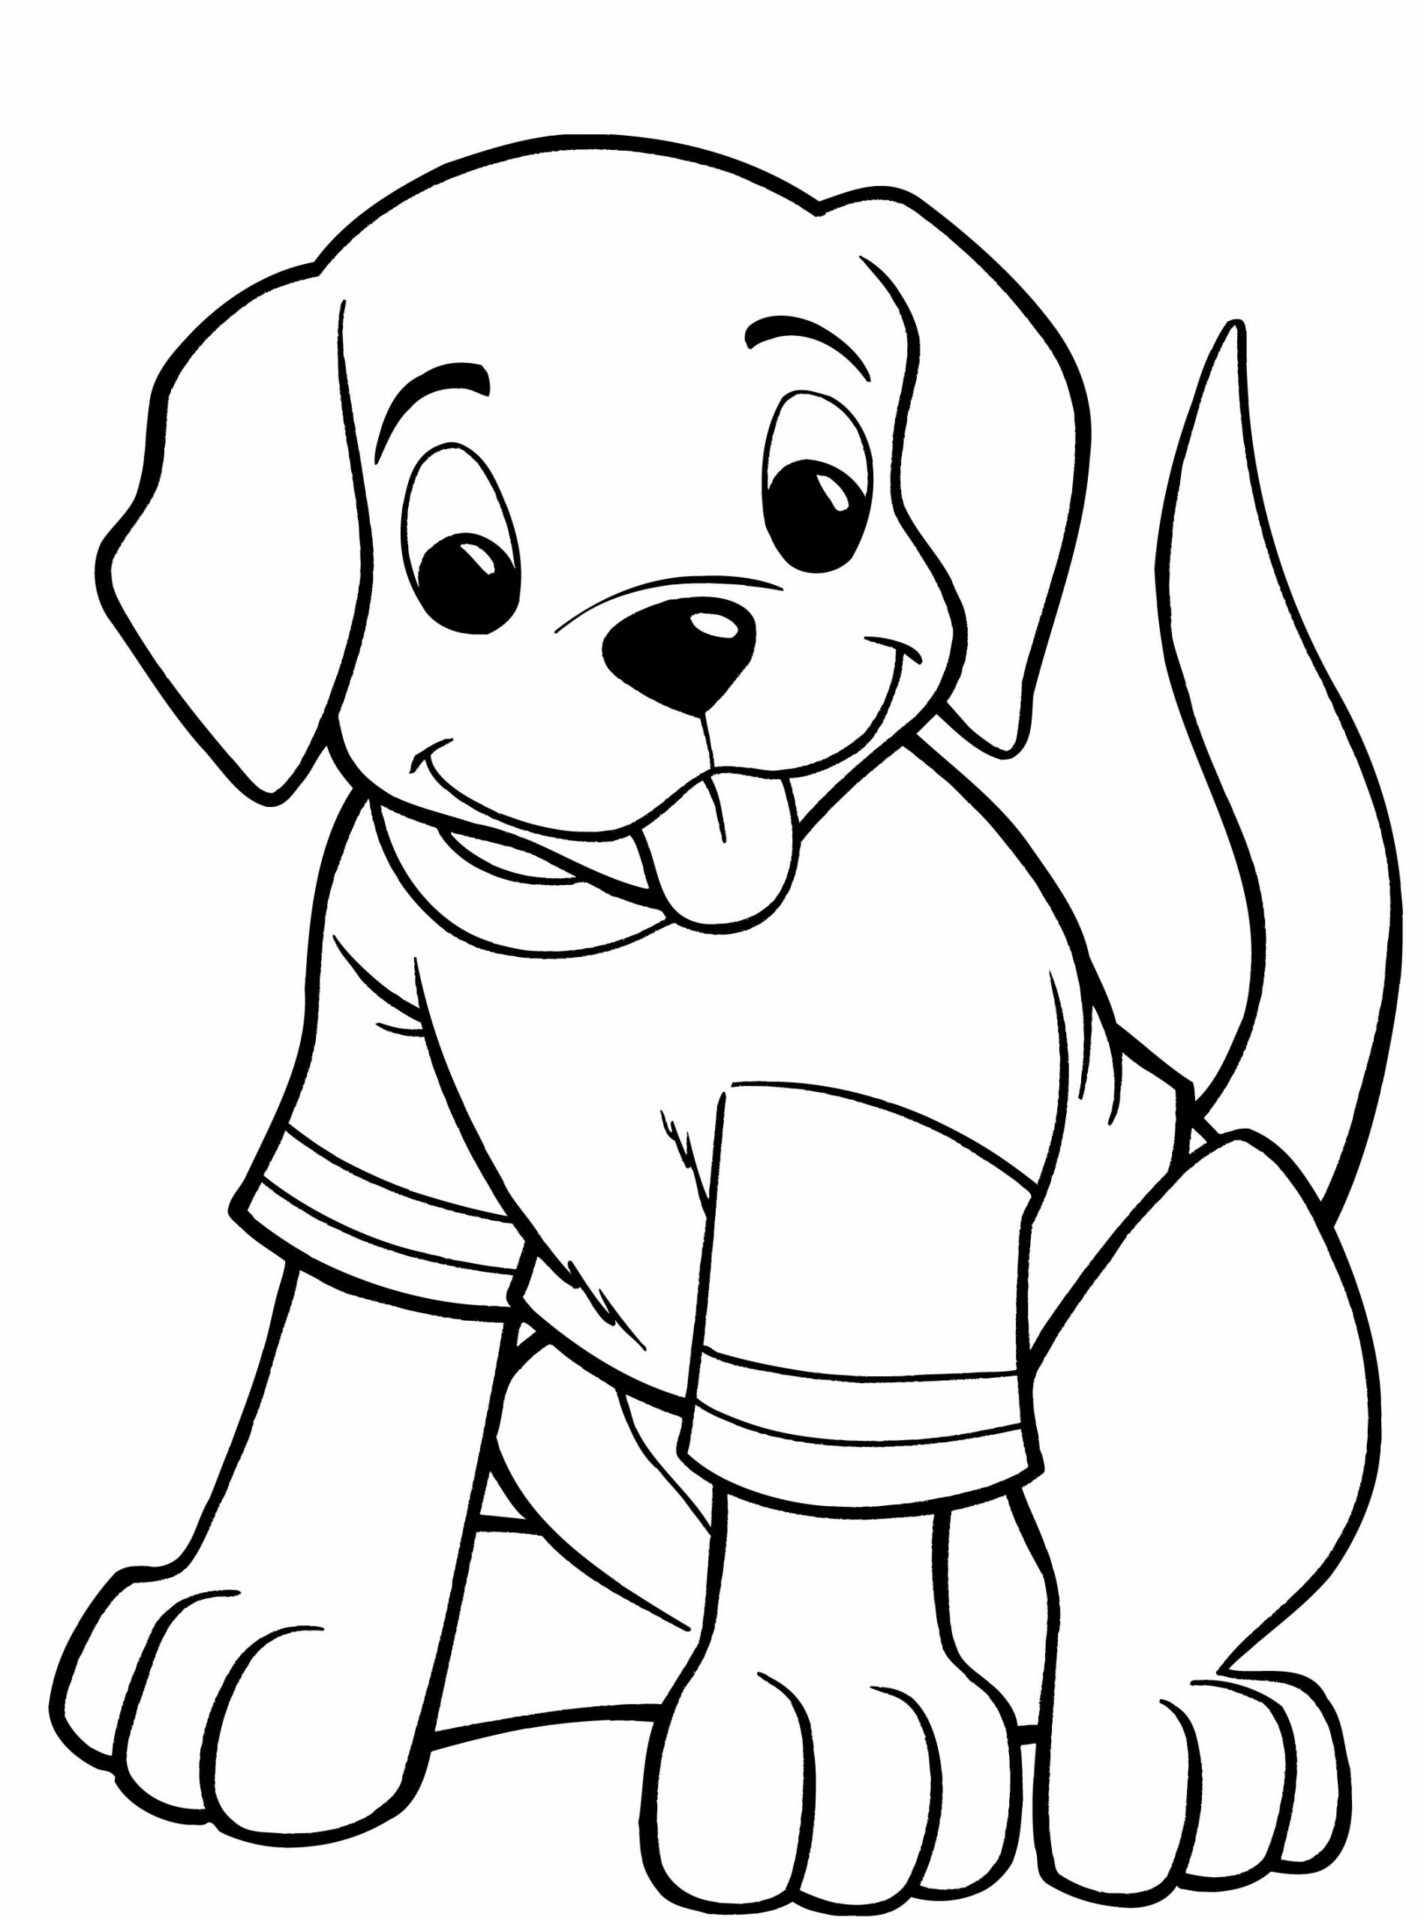 Puppy Wearing T Shirt Coloring Page   Free Printable Coloring ...